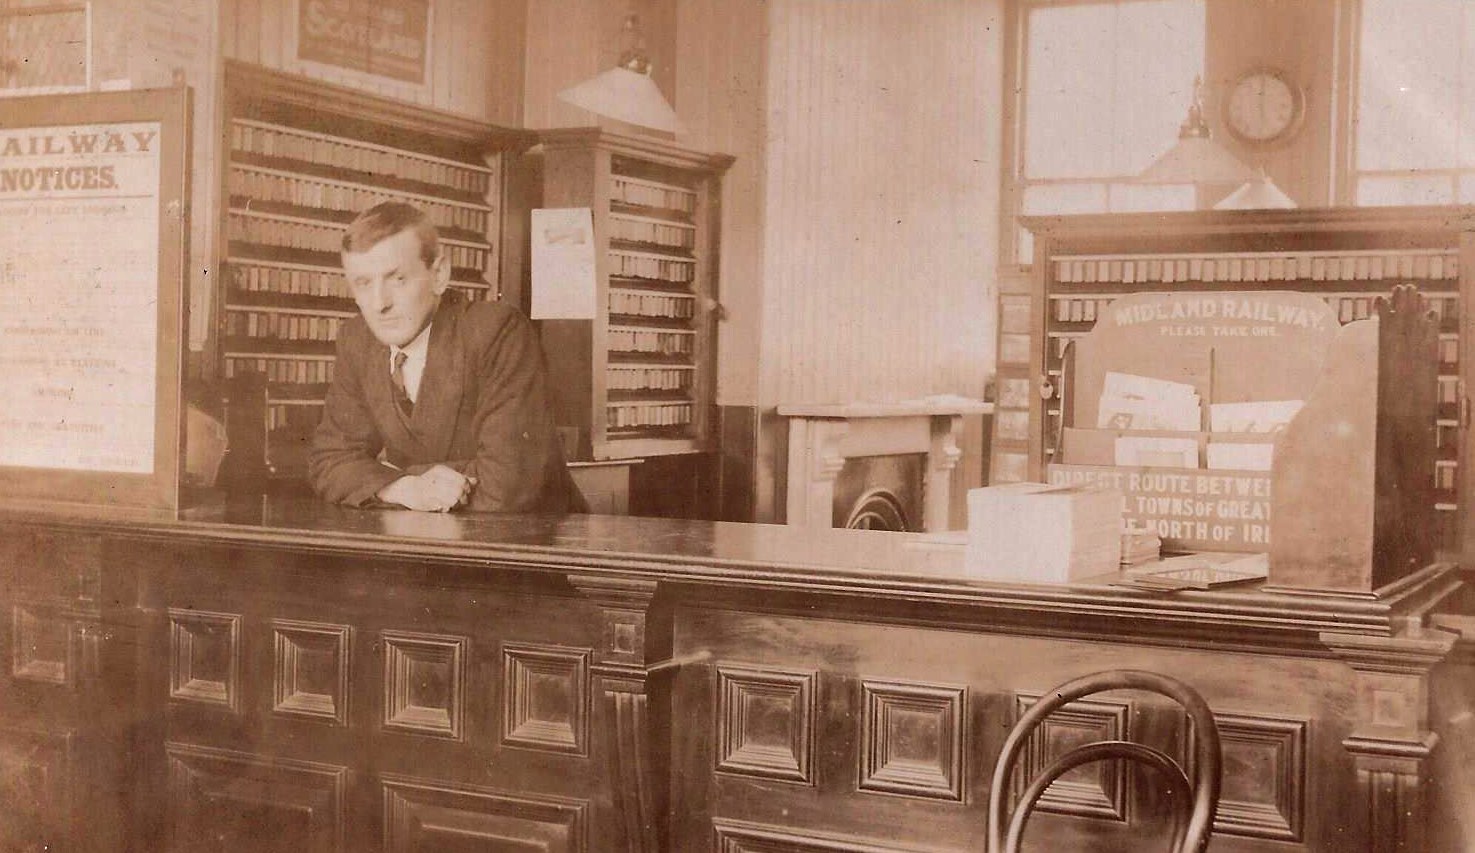 Black & white image: A rather stern looking clerk stares at the camera while leaning on the counter of a Midland Railway ticket office